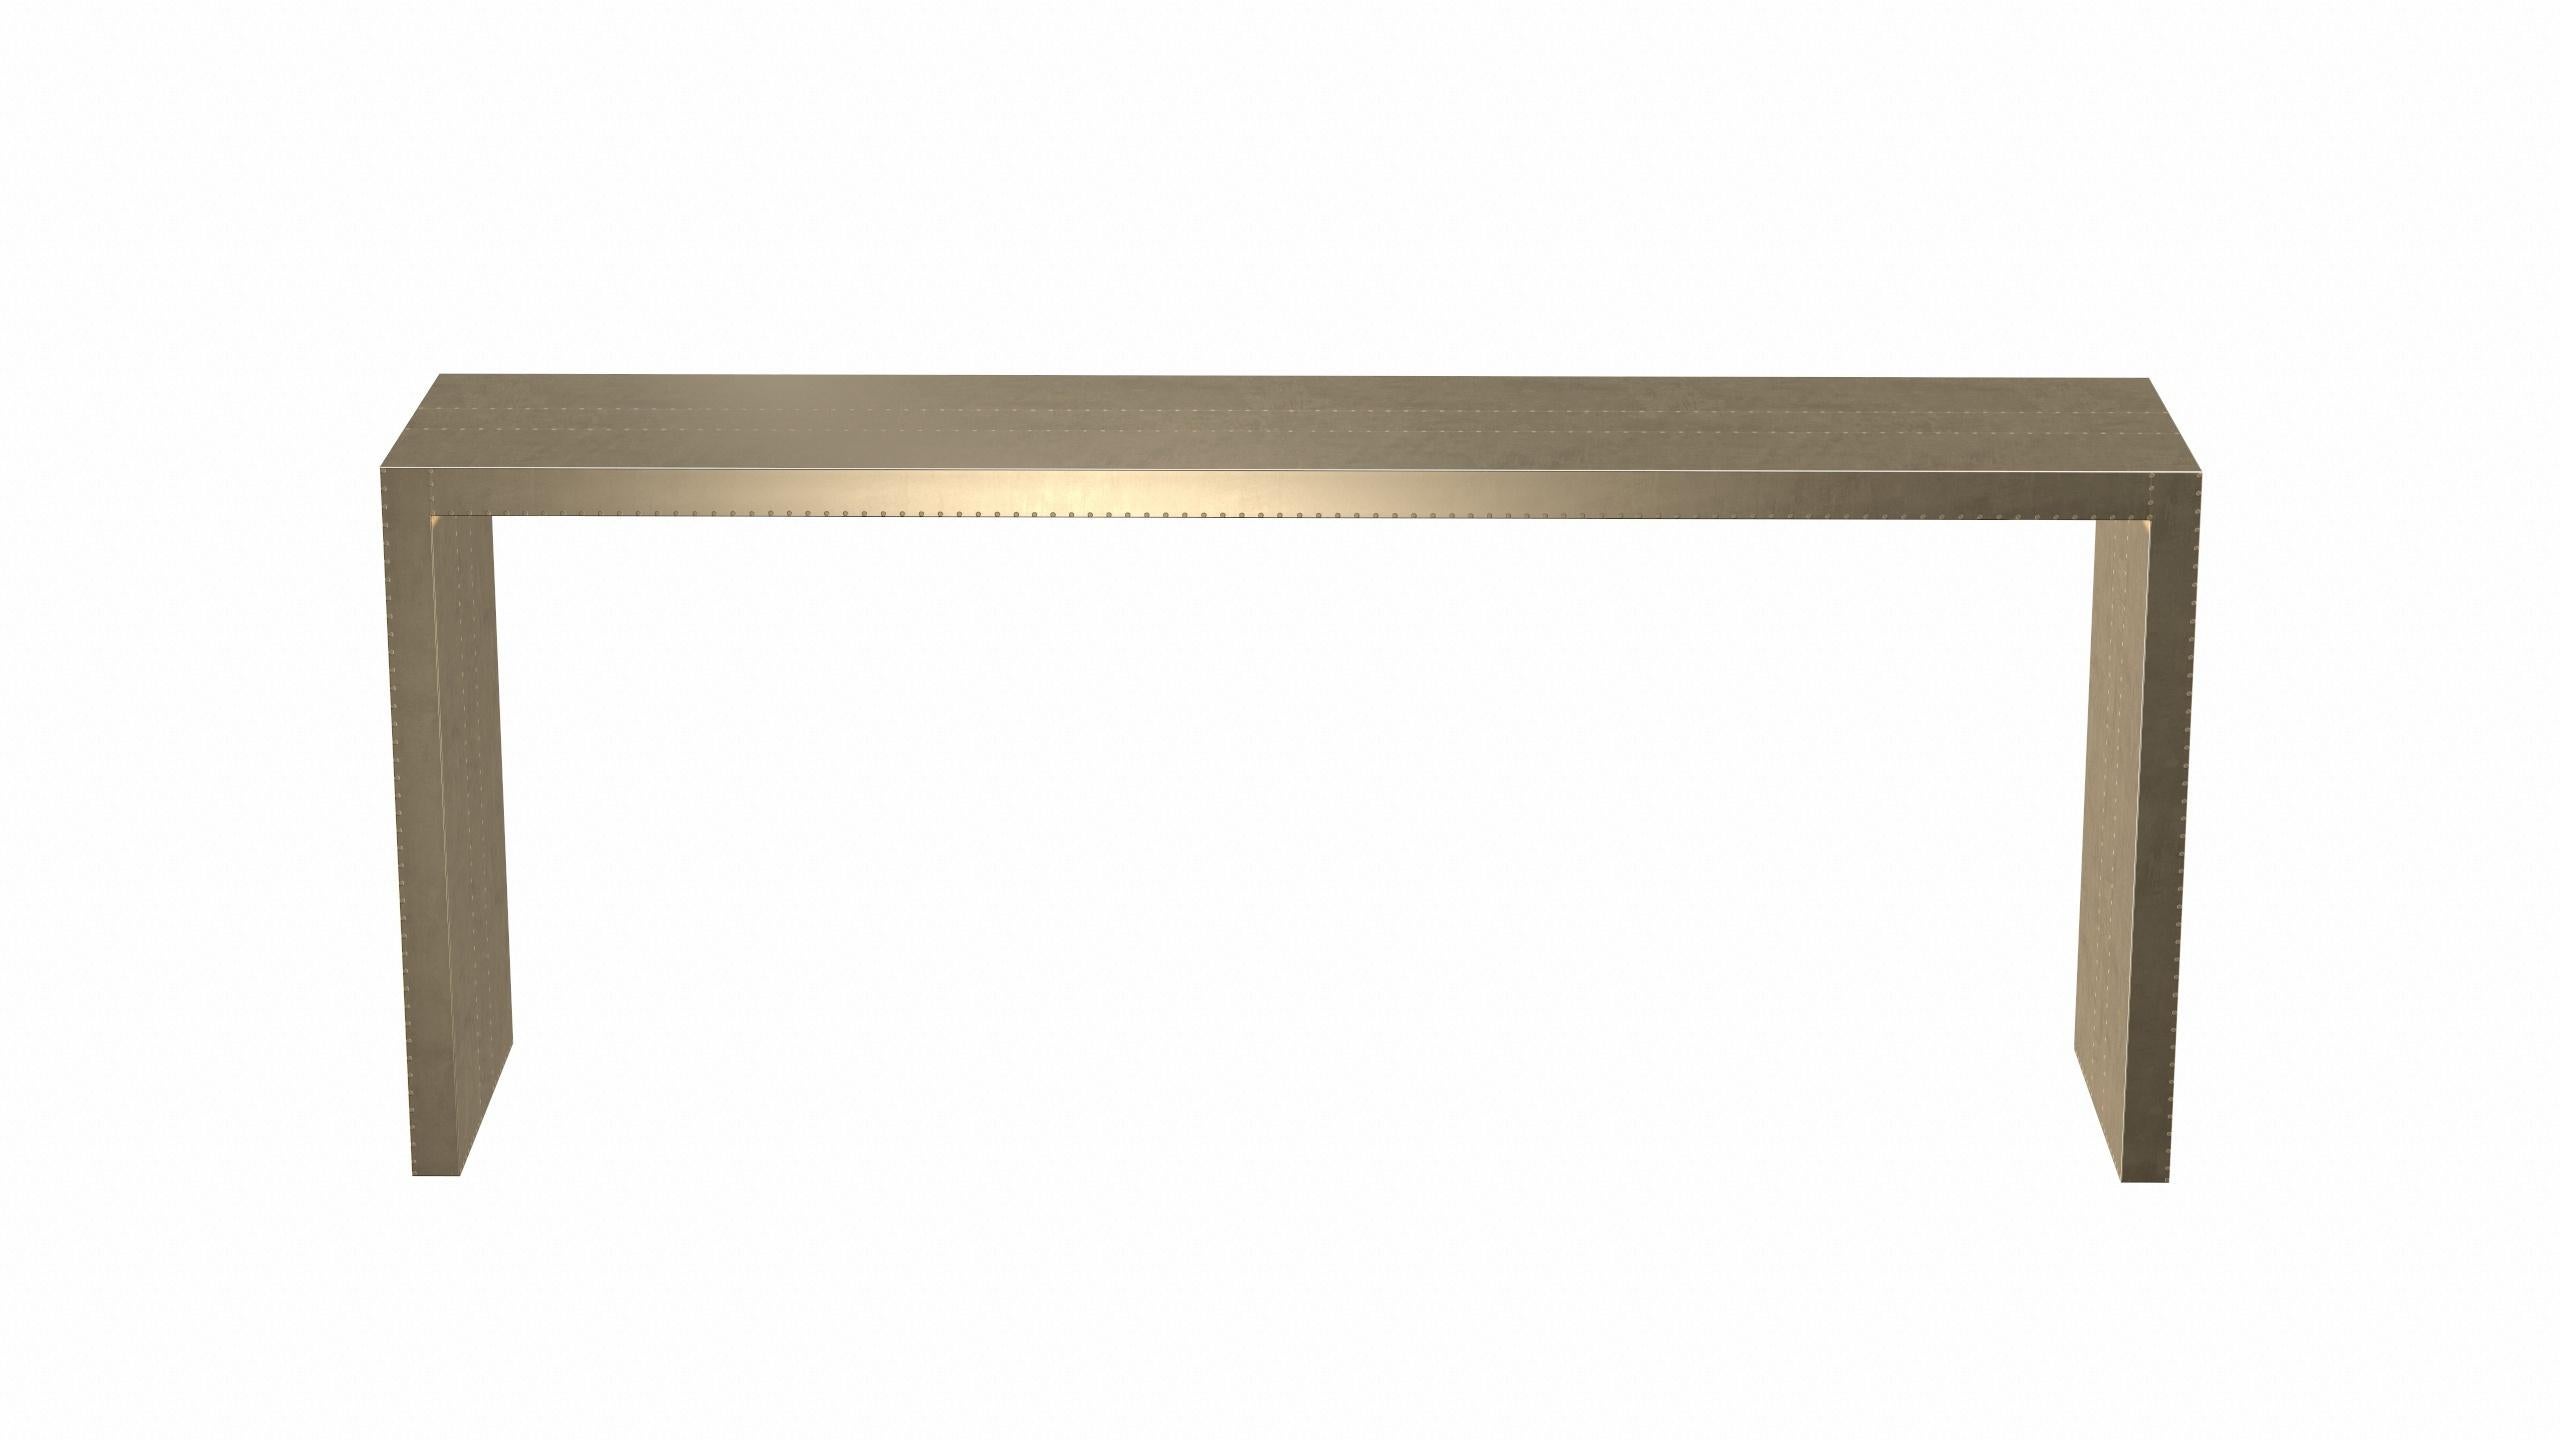 Woodwork Art Deco Rectangular Console Tables Smooth Brass Bronze by Alison Spear For Sale